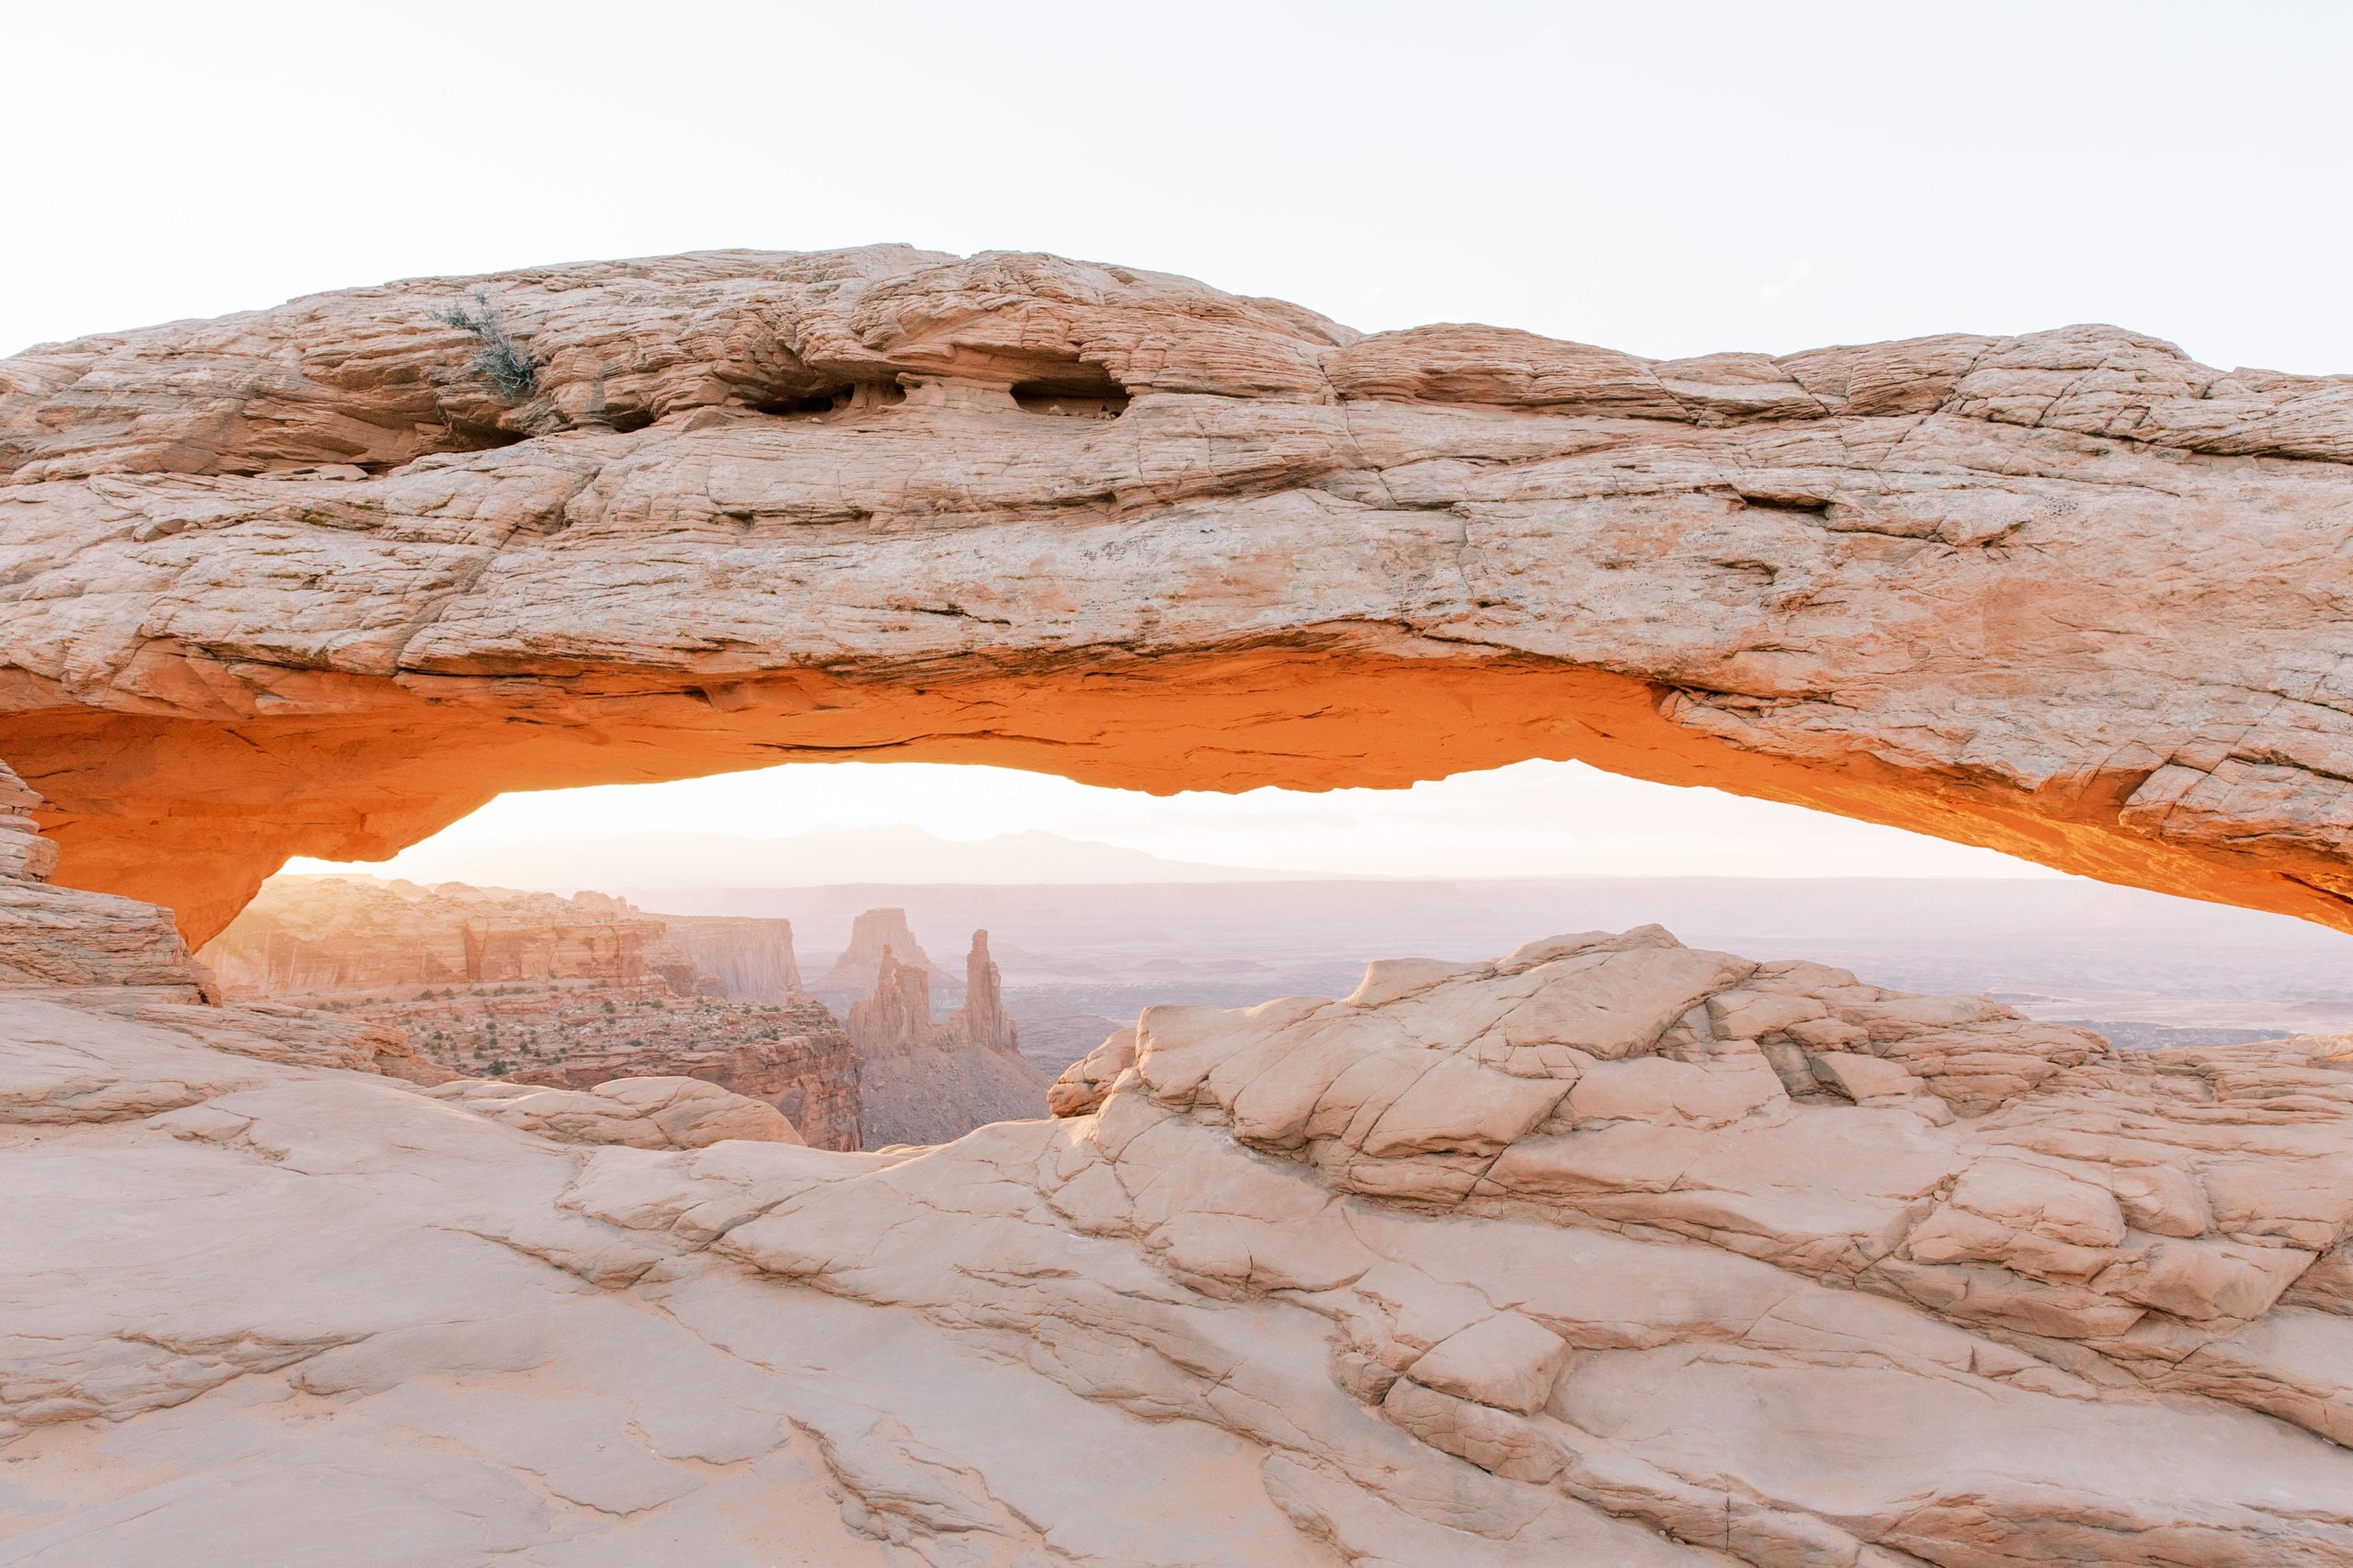 Summer vacation to Salt Lake City and Moab, Utah, to explore Canyonlands and Arches National Parks.